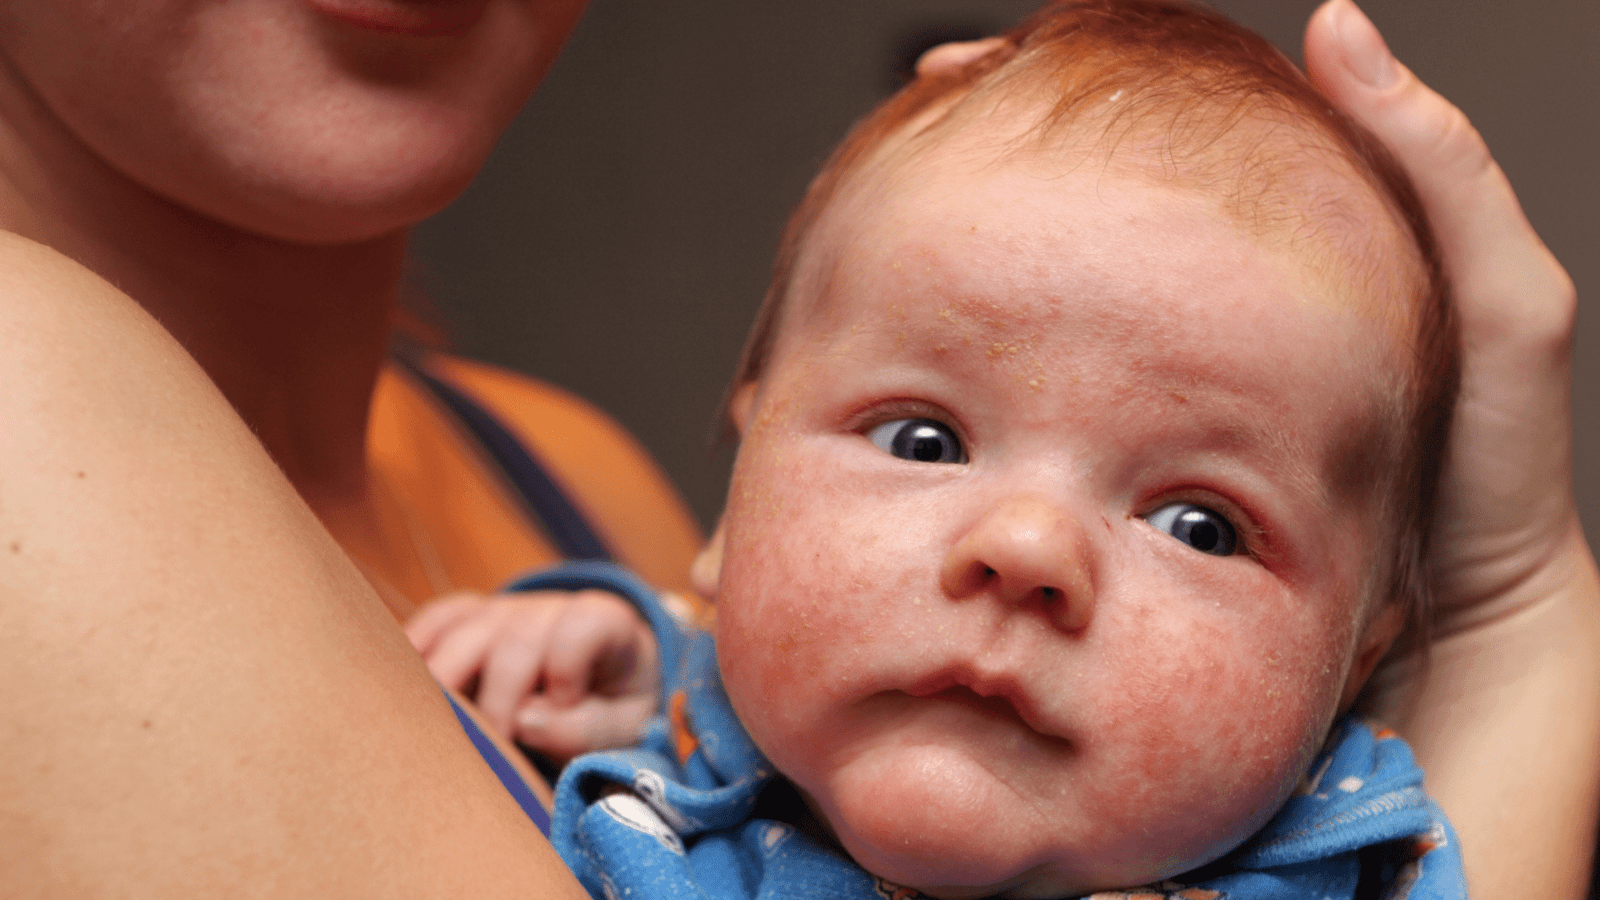 Everything Redheads Need to Know About Contact Dermatitis